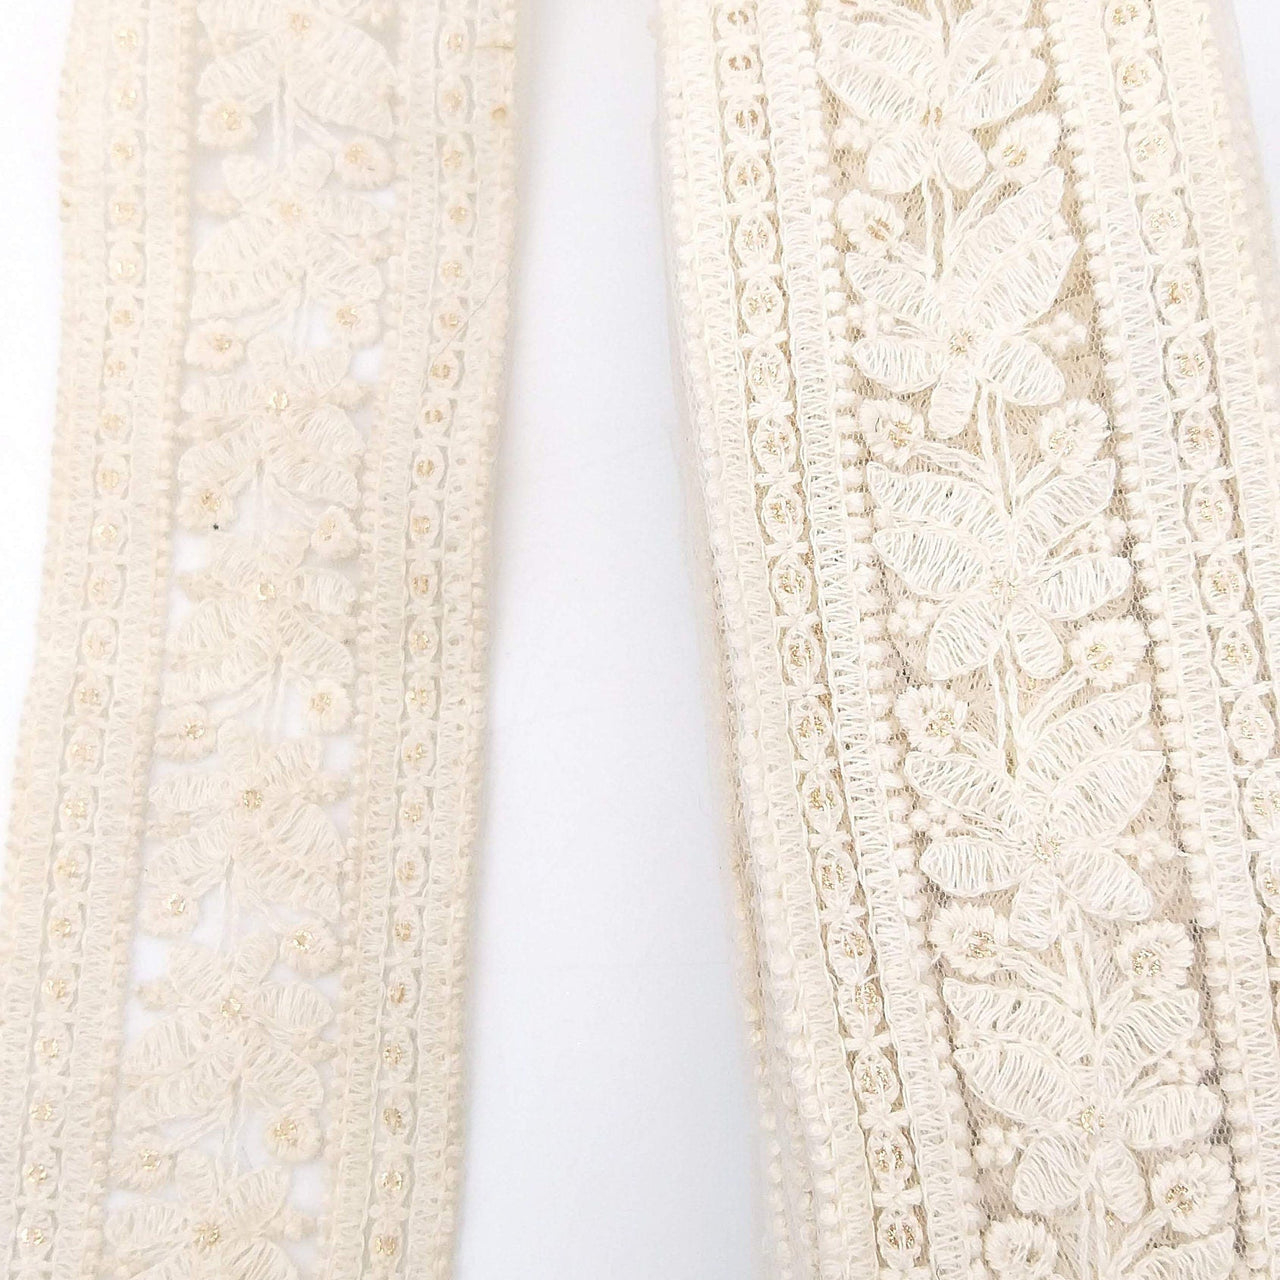 White Soft Net Lace Trim With Floral Embroidery And Gold Sequins, Sequinned Trim, Wedding Trim Bridal Trim